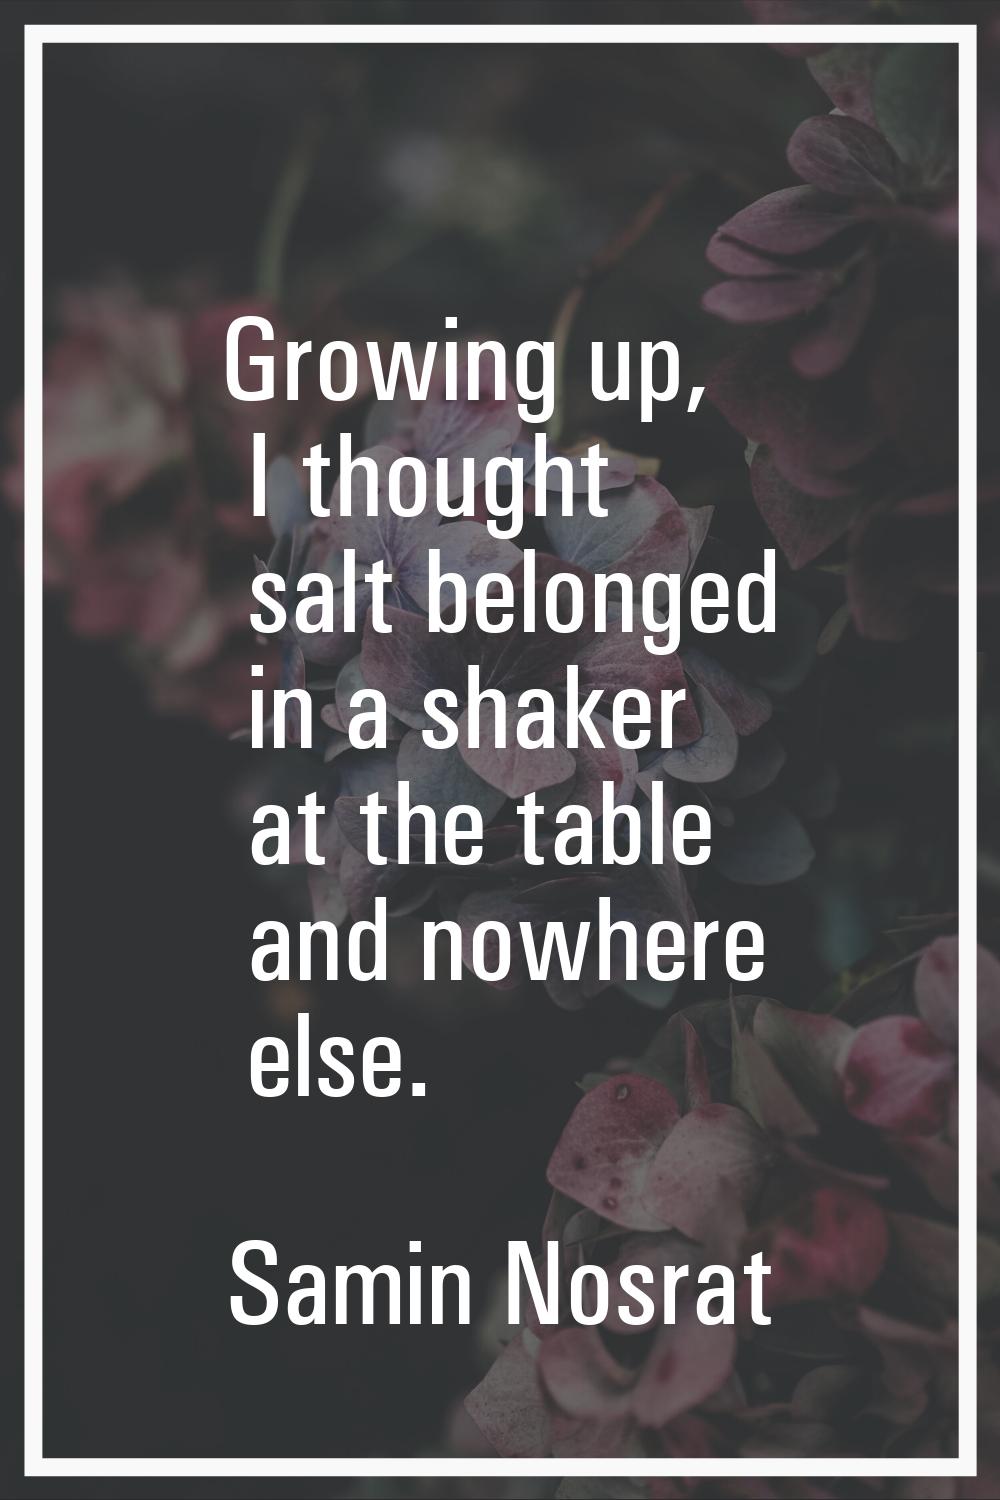 Growing up, I thought salt belonged in a shaker at the table and nowhere else.